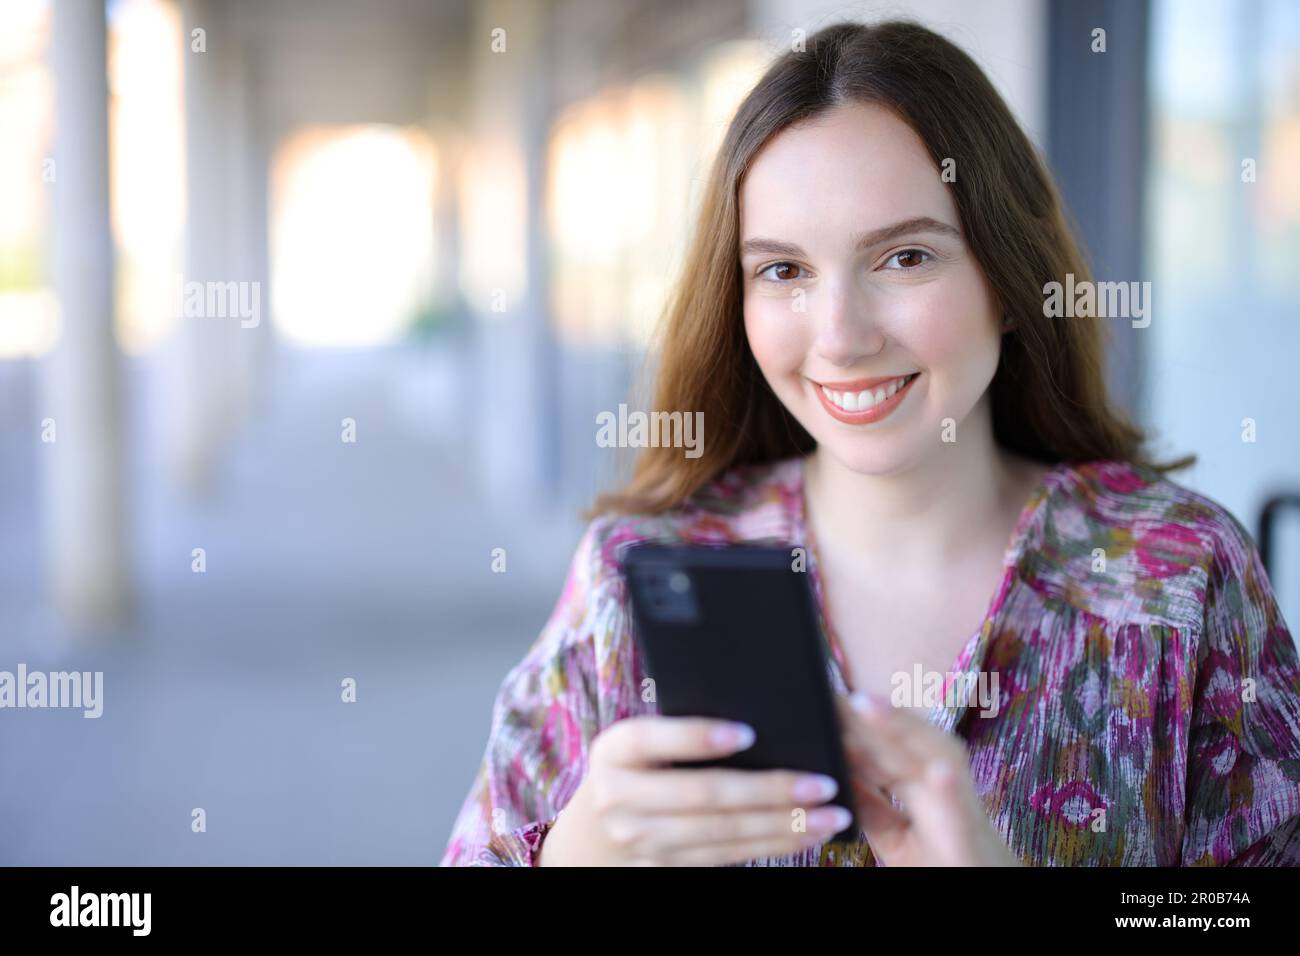 Happy woman holding cellphone looking at camera in the street Stock Photo